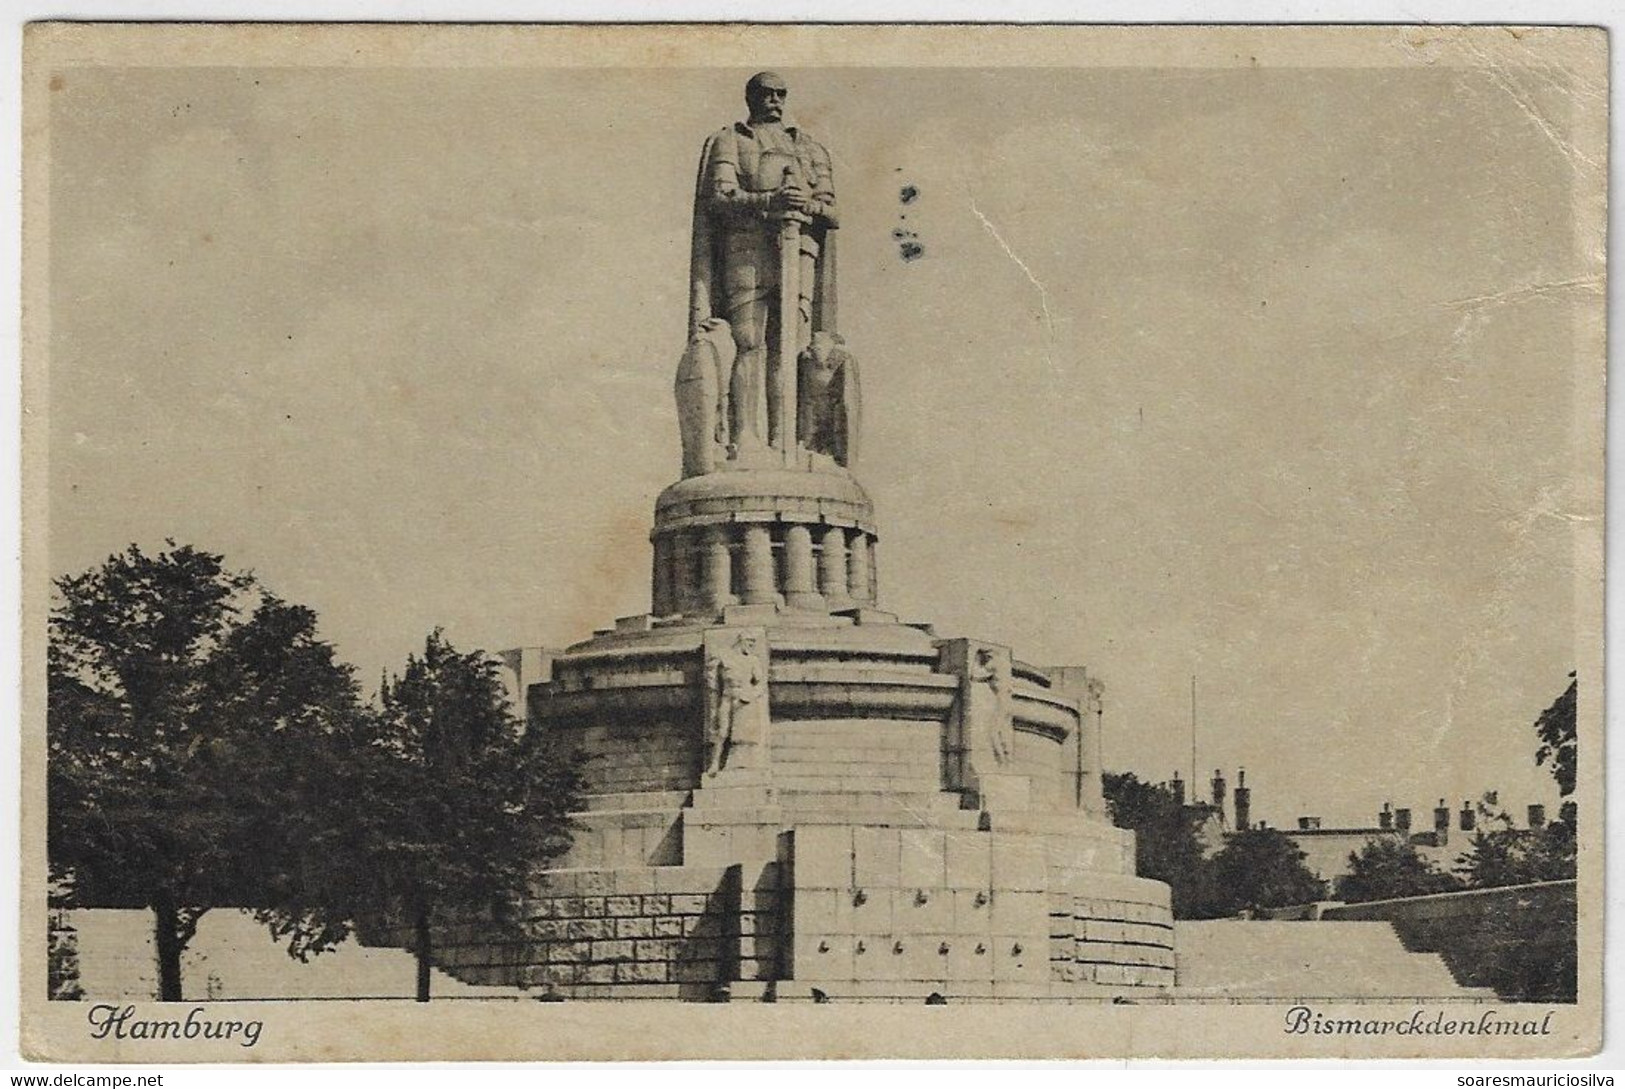 Germany 1928 Postcard Bismarck Monument Hamburg Stamp 15 Pfennig Cancel Wiesbaden The Spa For Autumn And Winter Cures - Termalismo